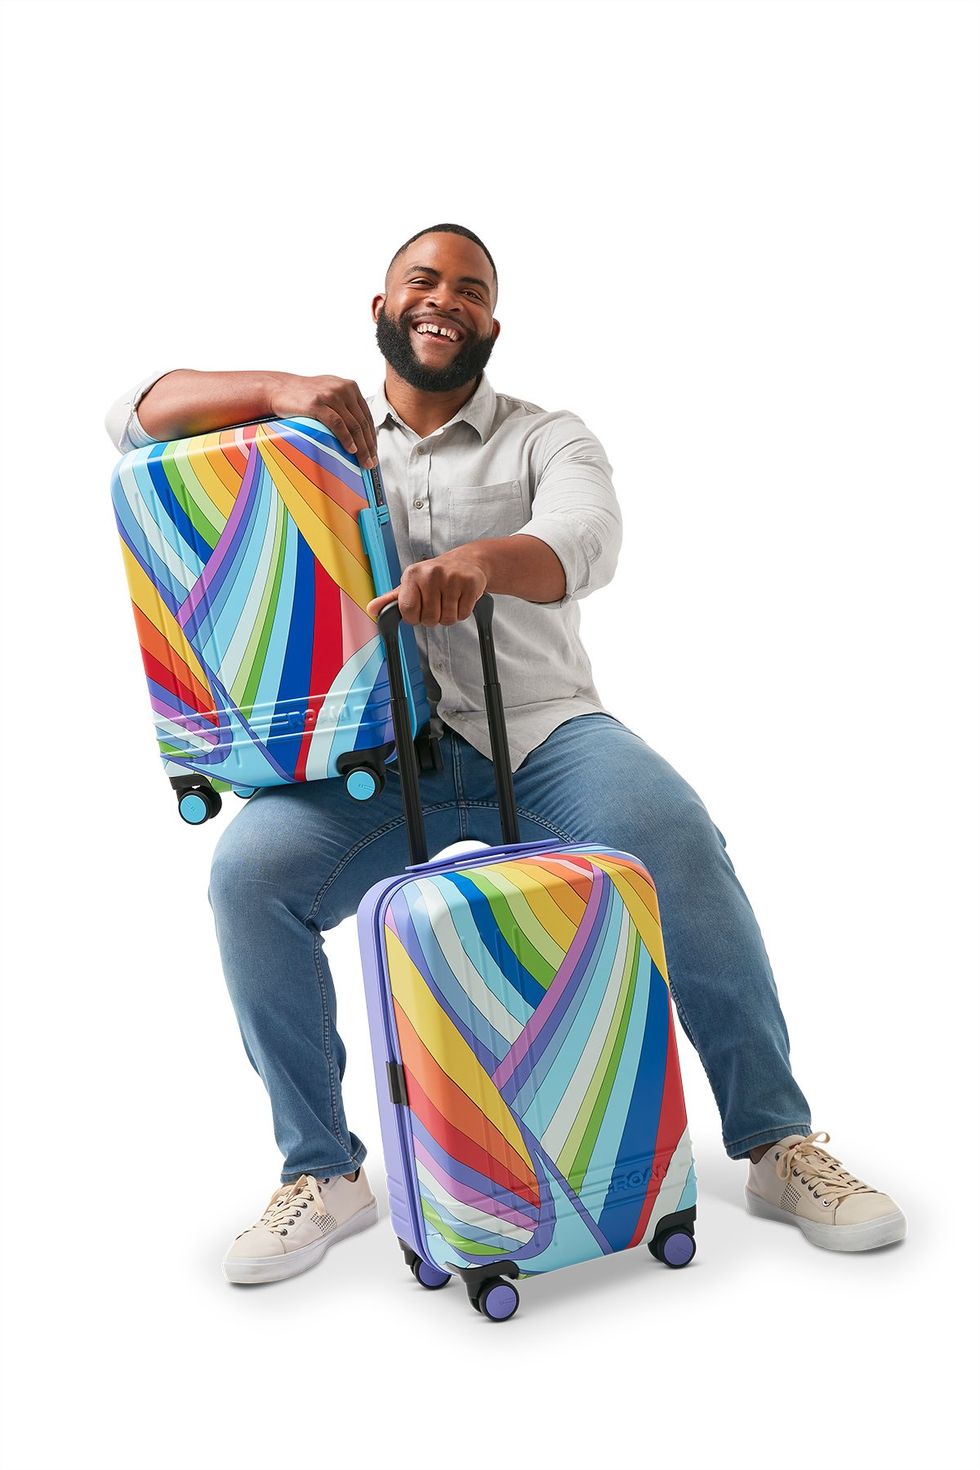 ROAM Luggage Introduces Limited Edition Pride Carry-On